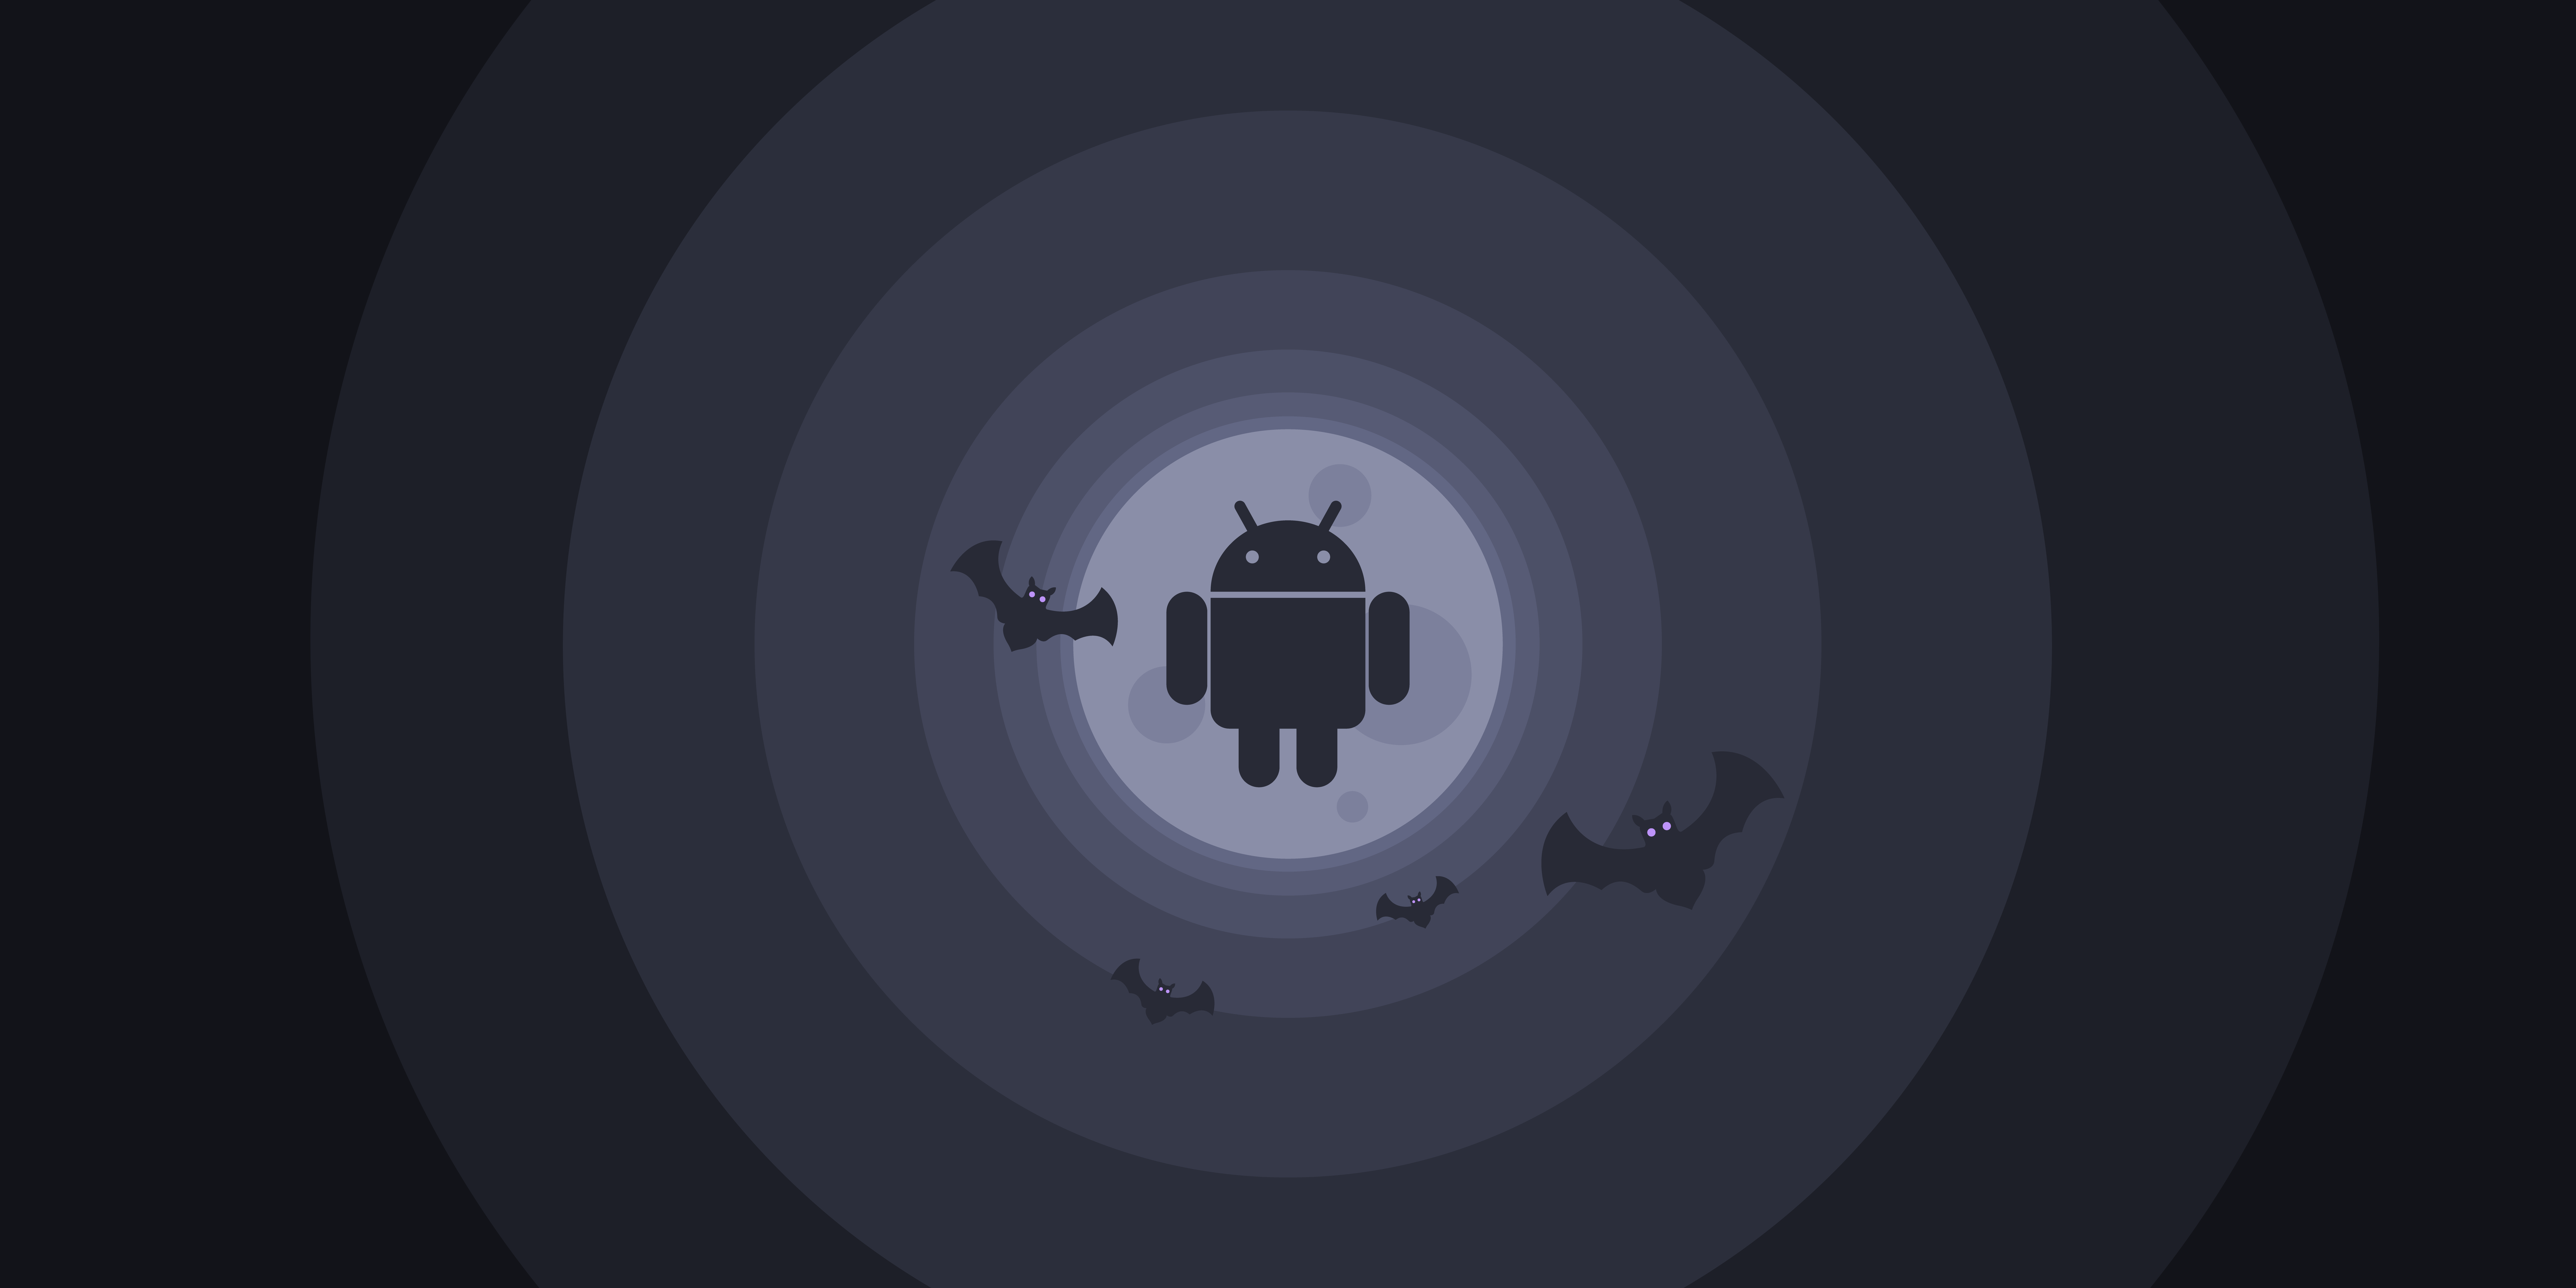 General 12000x6000 android 13 Android L Android (operating system) robot minimalism logo operating system material minimal simple background material style dark background bats Moon